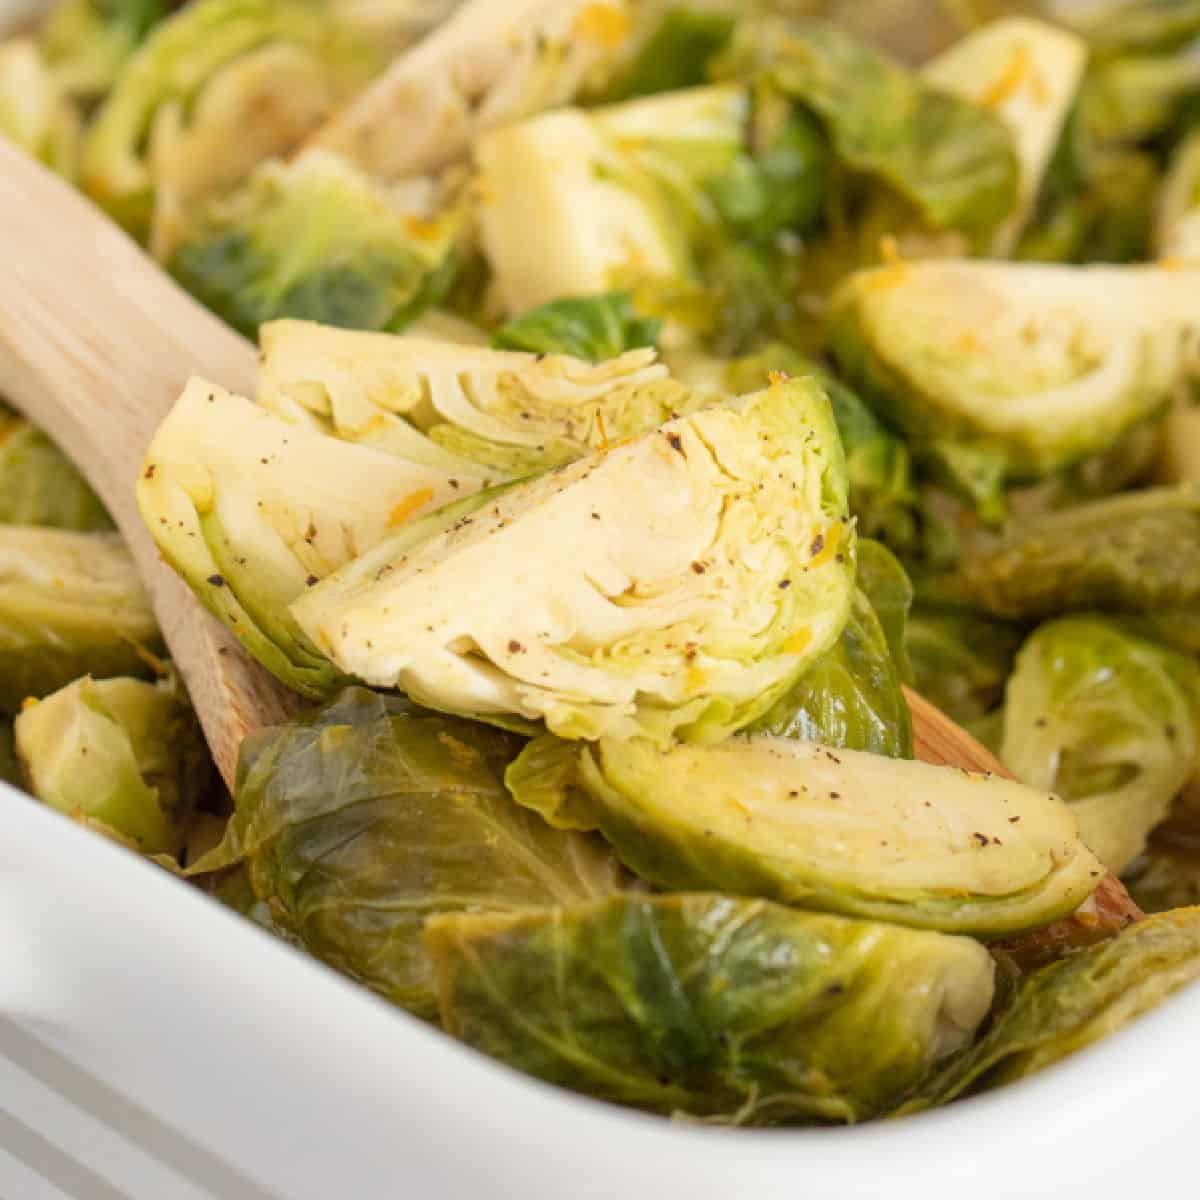 square image of roasted brussels sprouts in a baking dish with a wooden spoon